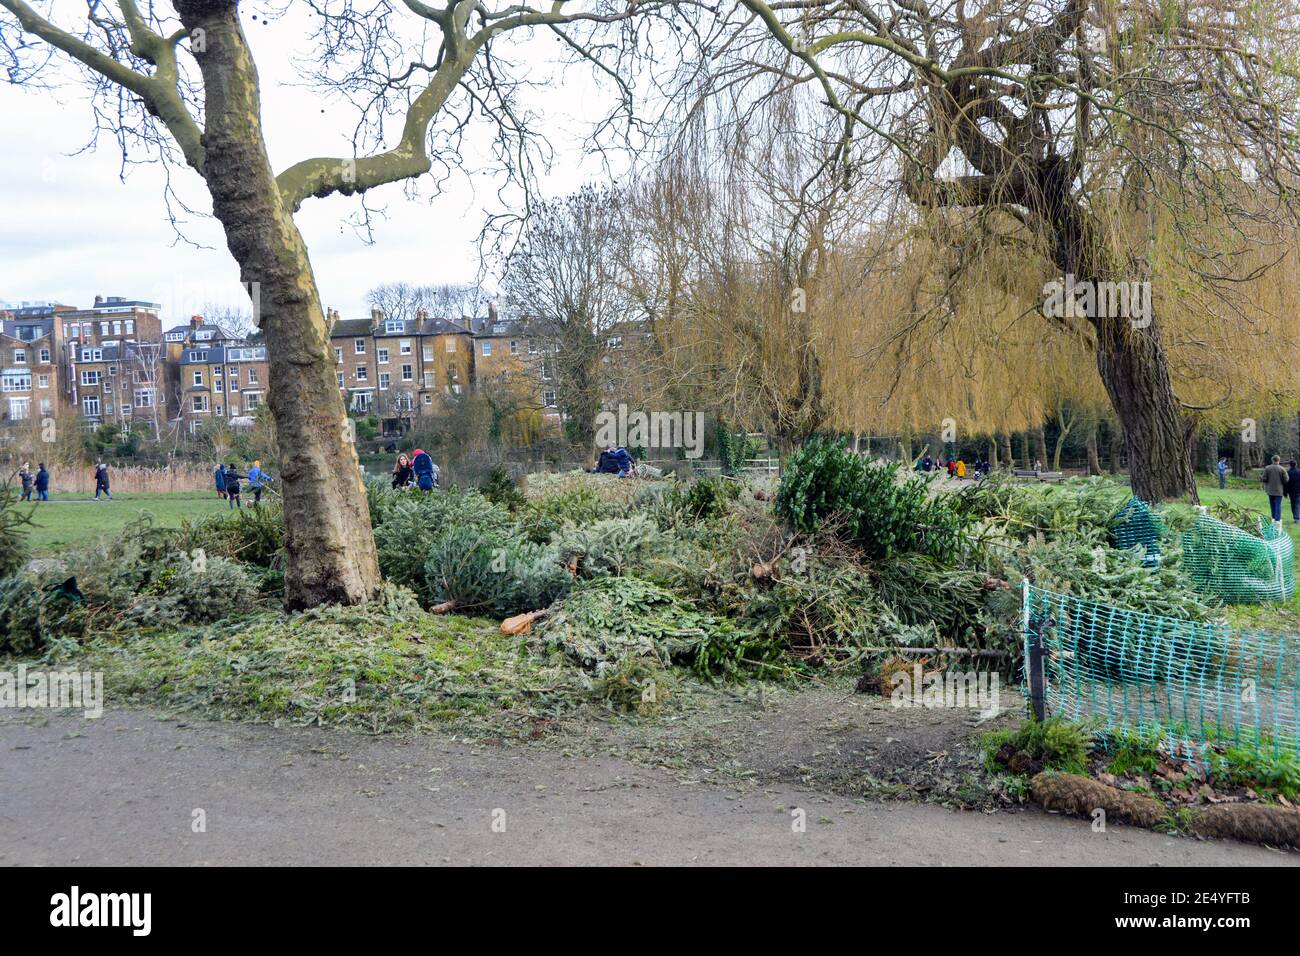 Over fifty used Christmas trees lie abandoned on Hampstead Heath in January. Park wardens make an effort to chop them up into mulch for recycling. Stock Photo